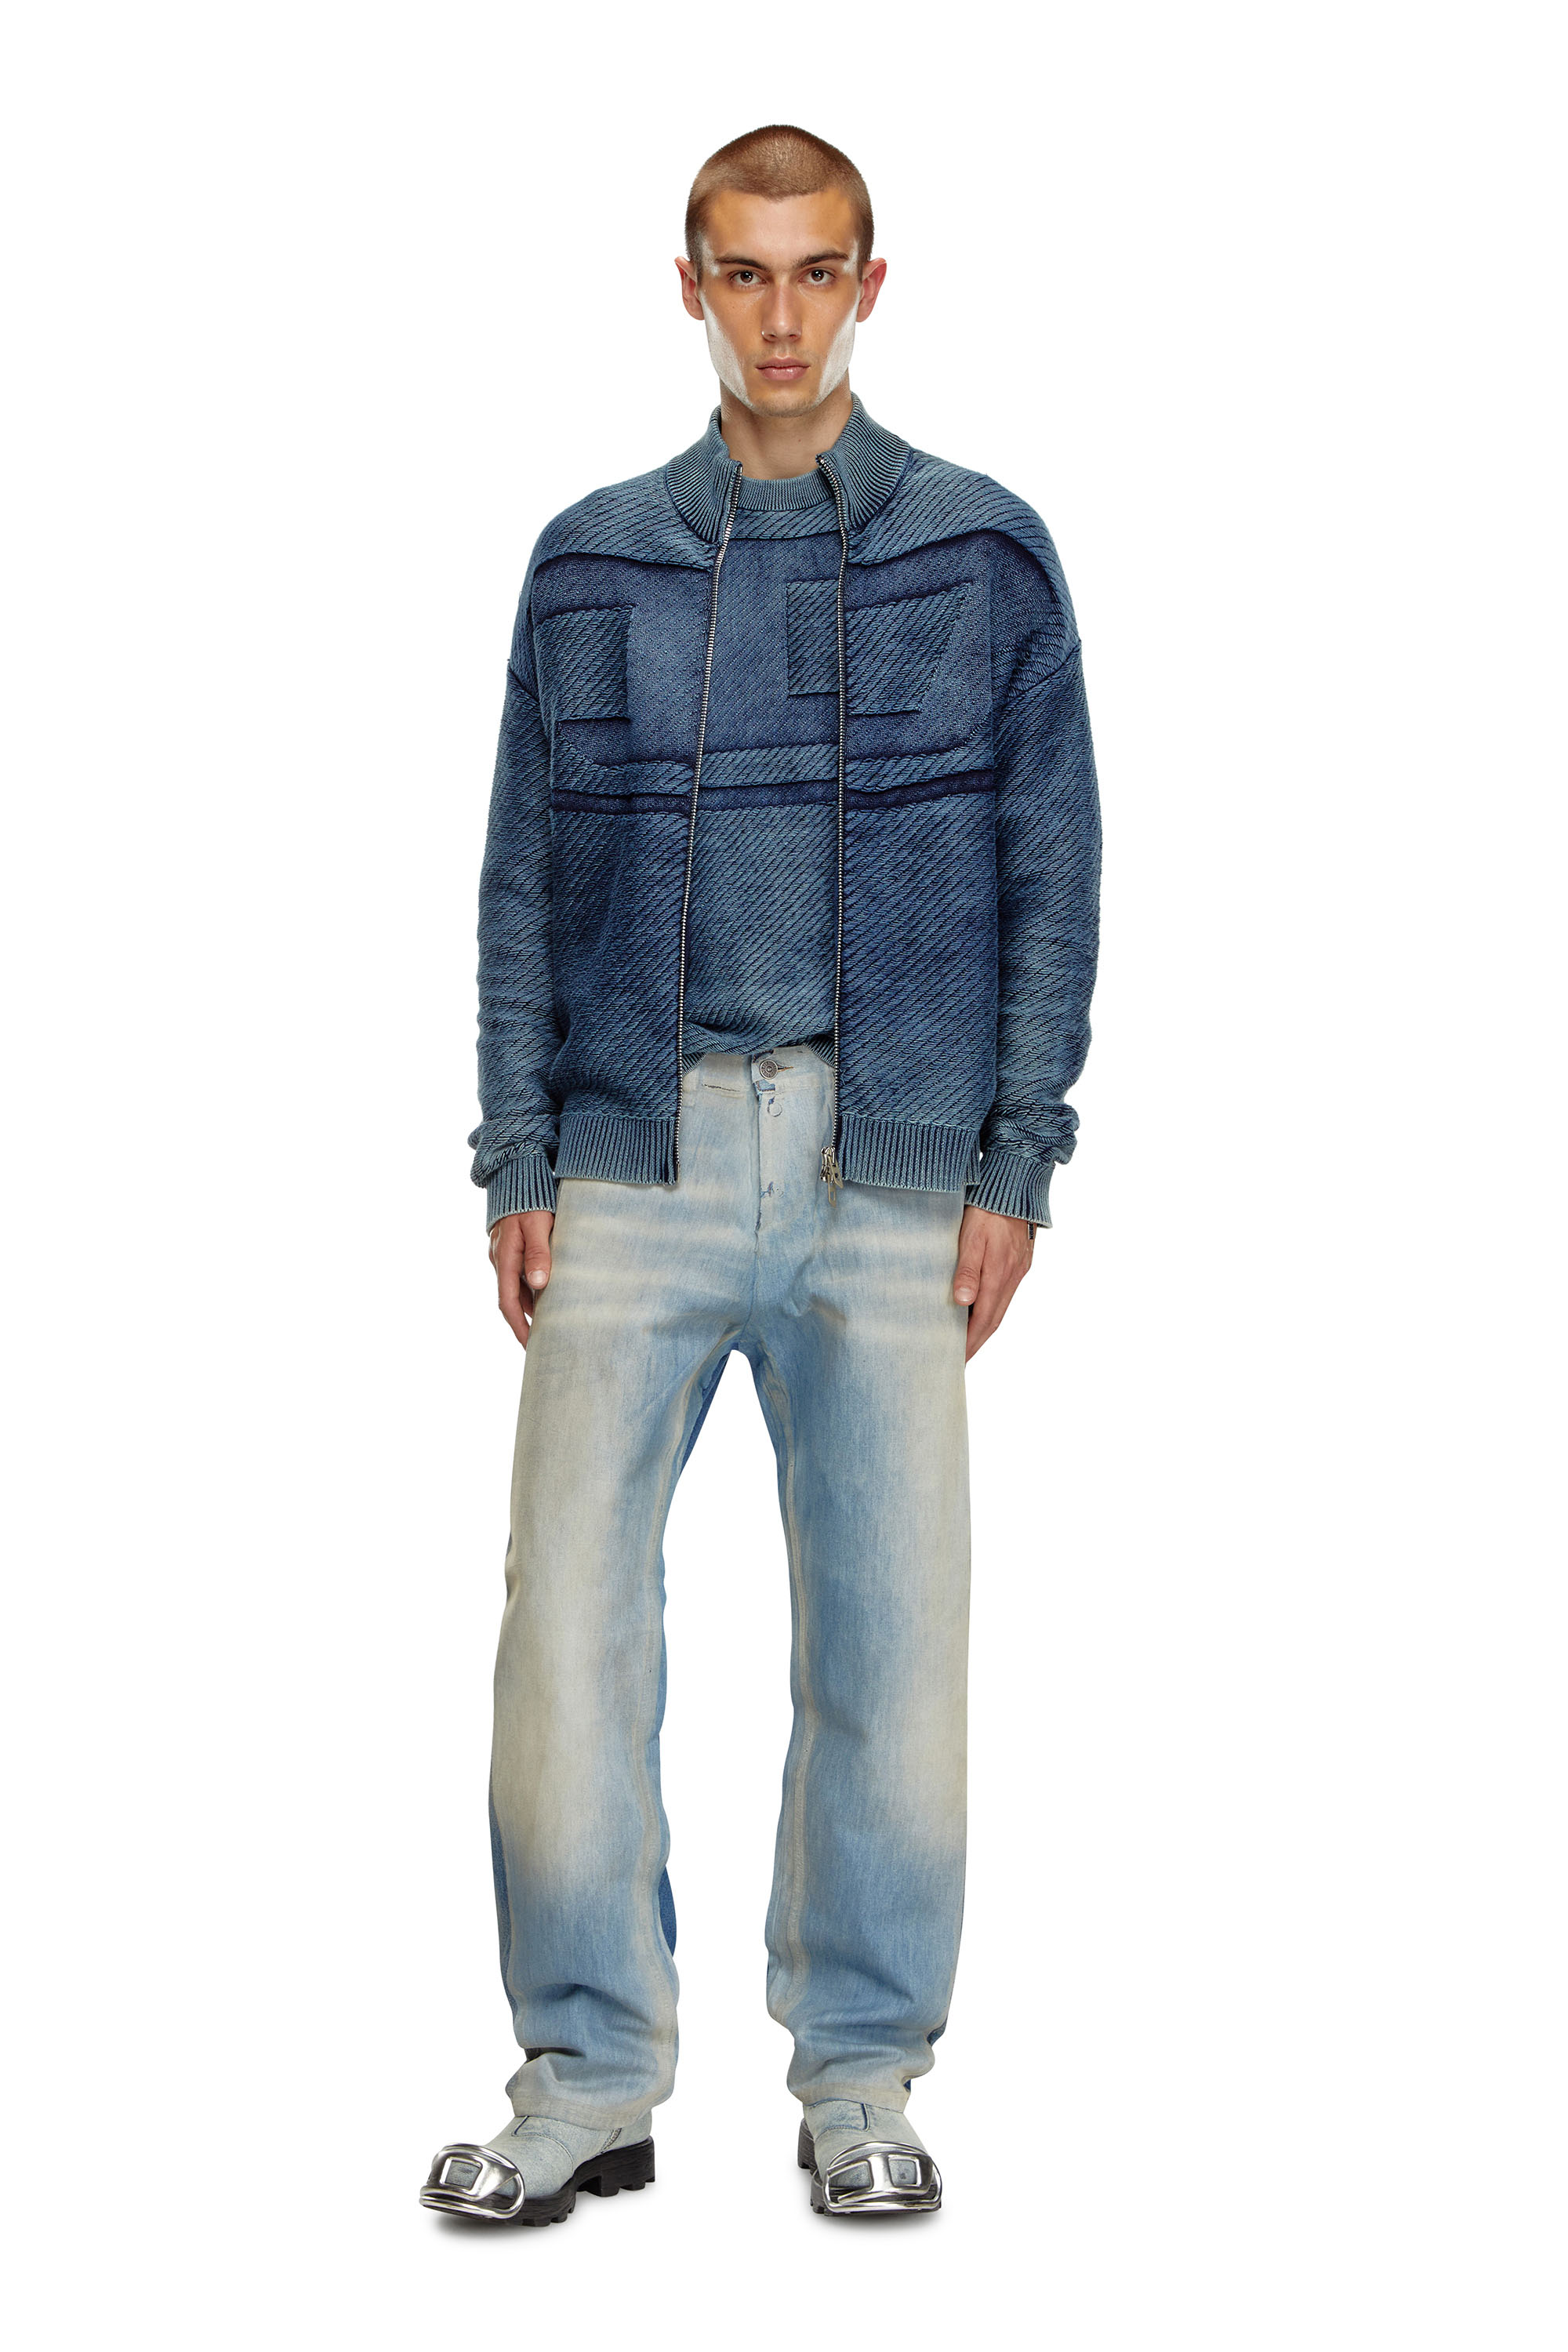 Diesel - Straight Jeans 2010 D-Macs 09K22, Hombre Straight Jeans - 2010 D-Macs in Azul marino - Image 2